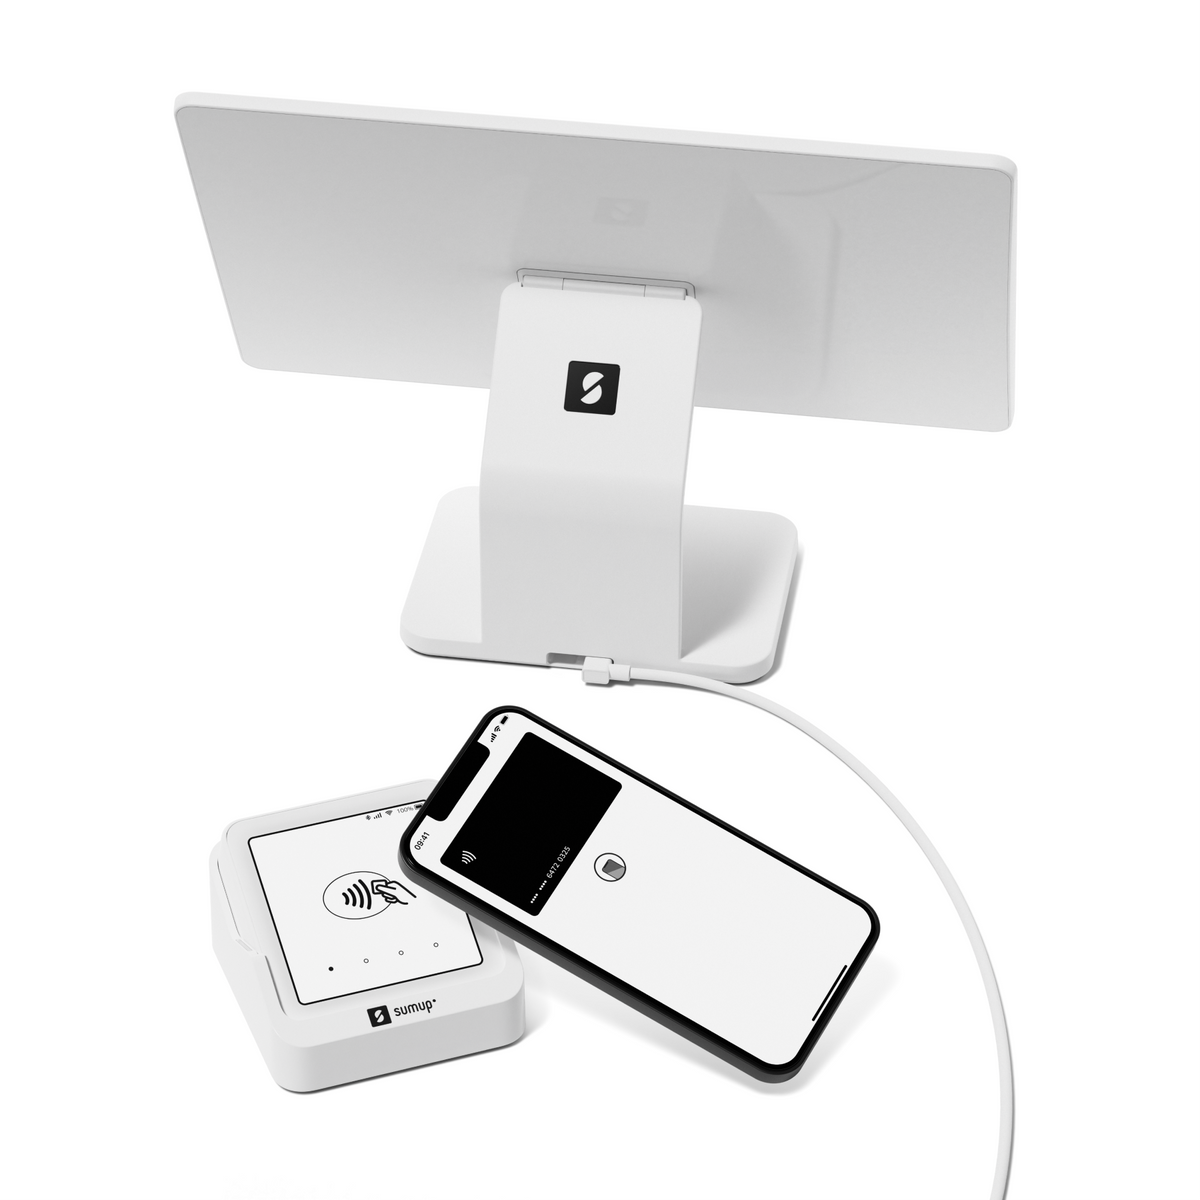 SumUp Point of Sale Lite + Solo Card reader | 226-802604501 from Sumup - DID Electrical